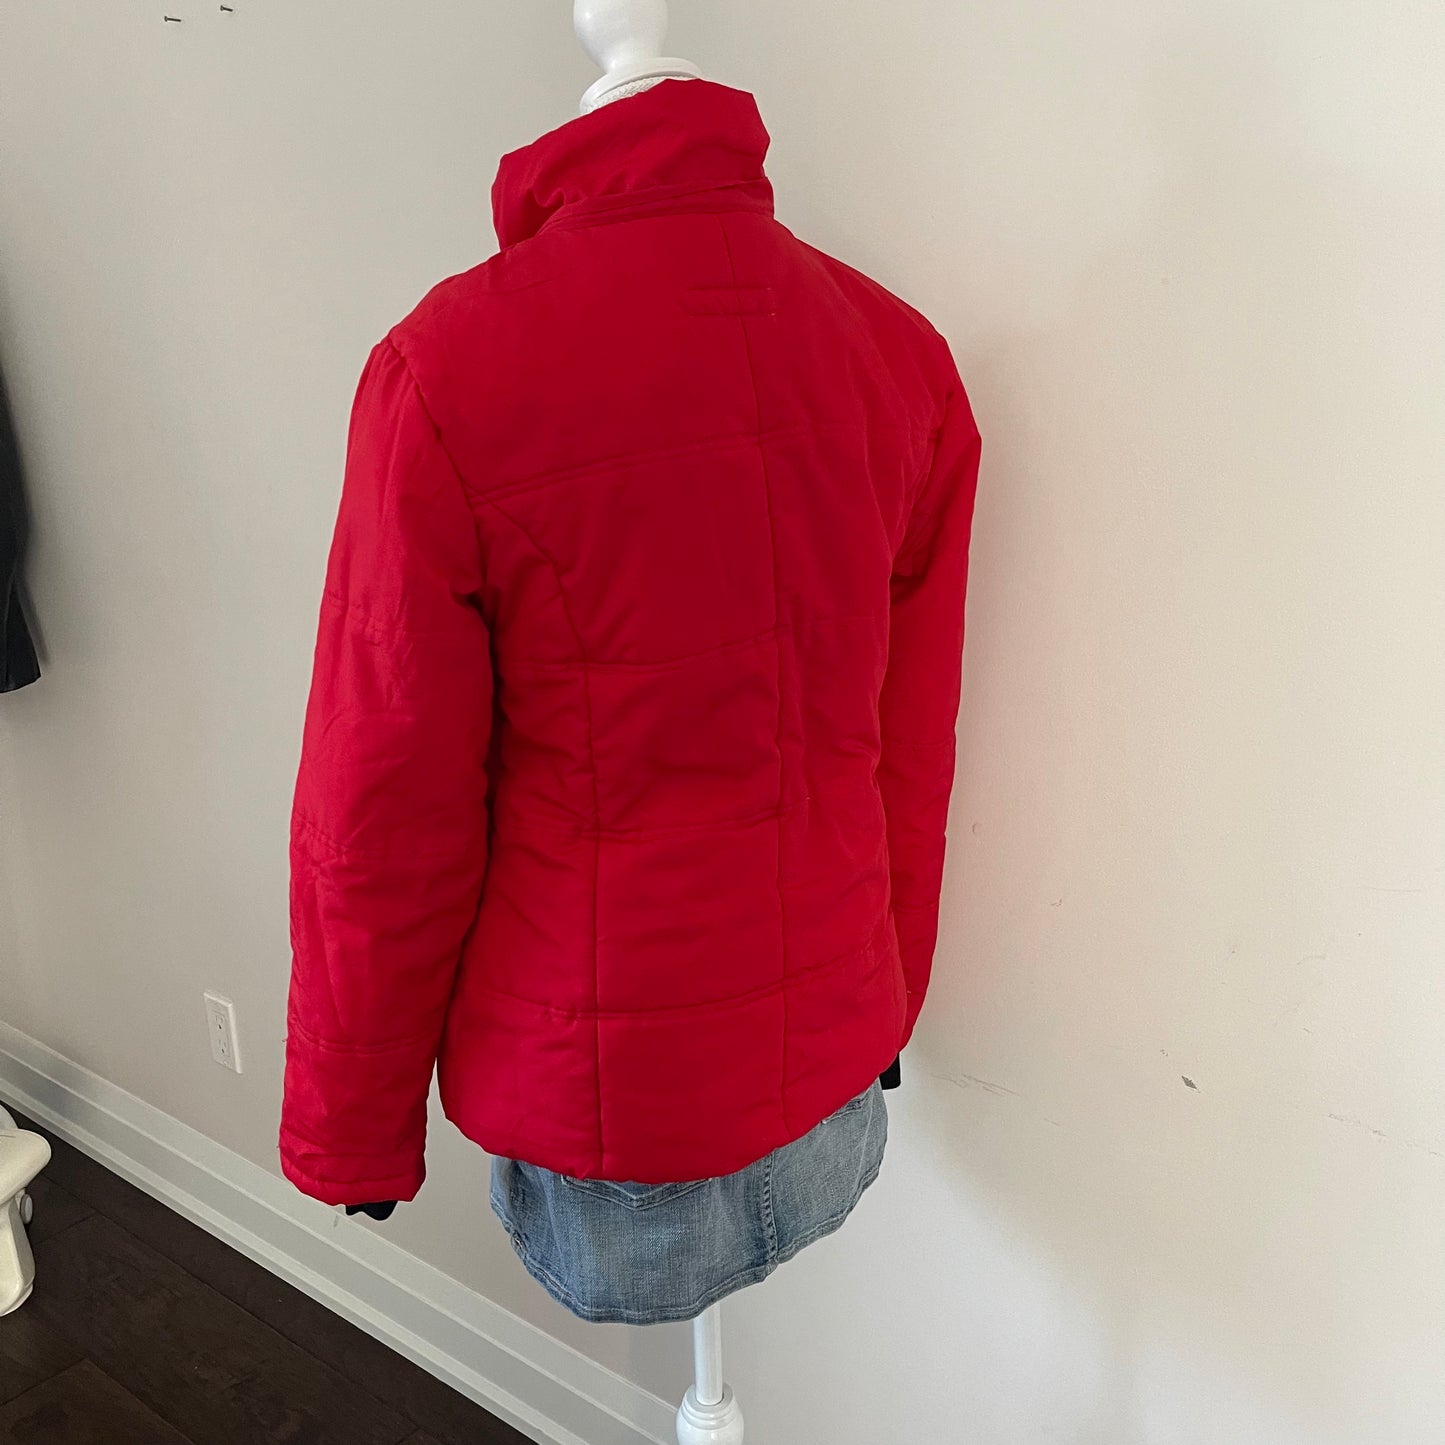 Y2K Baby Phat Red Puffer Jacket